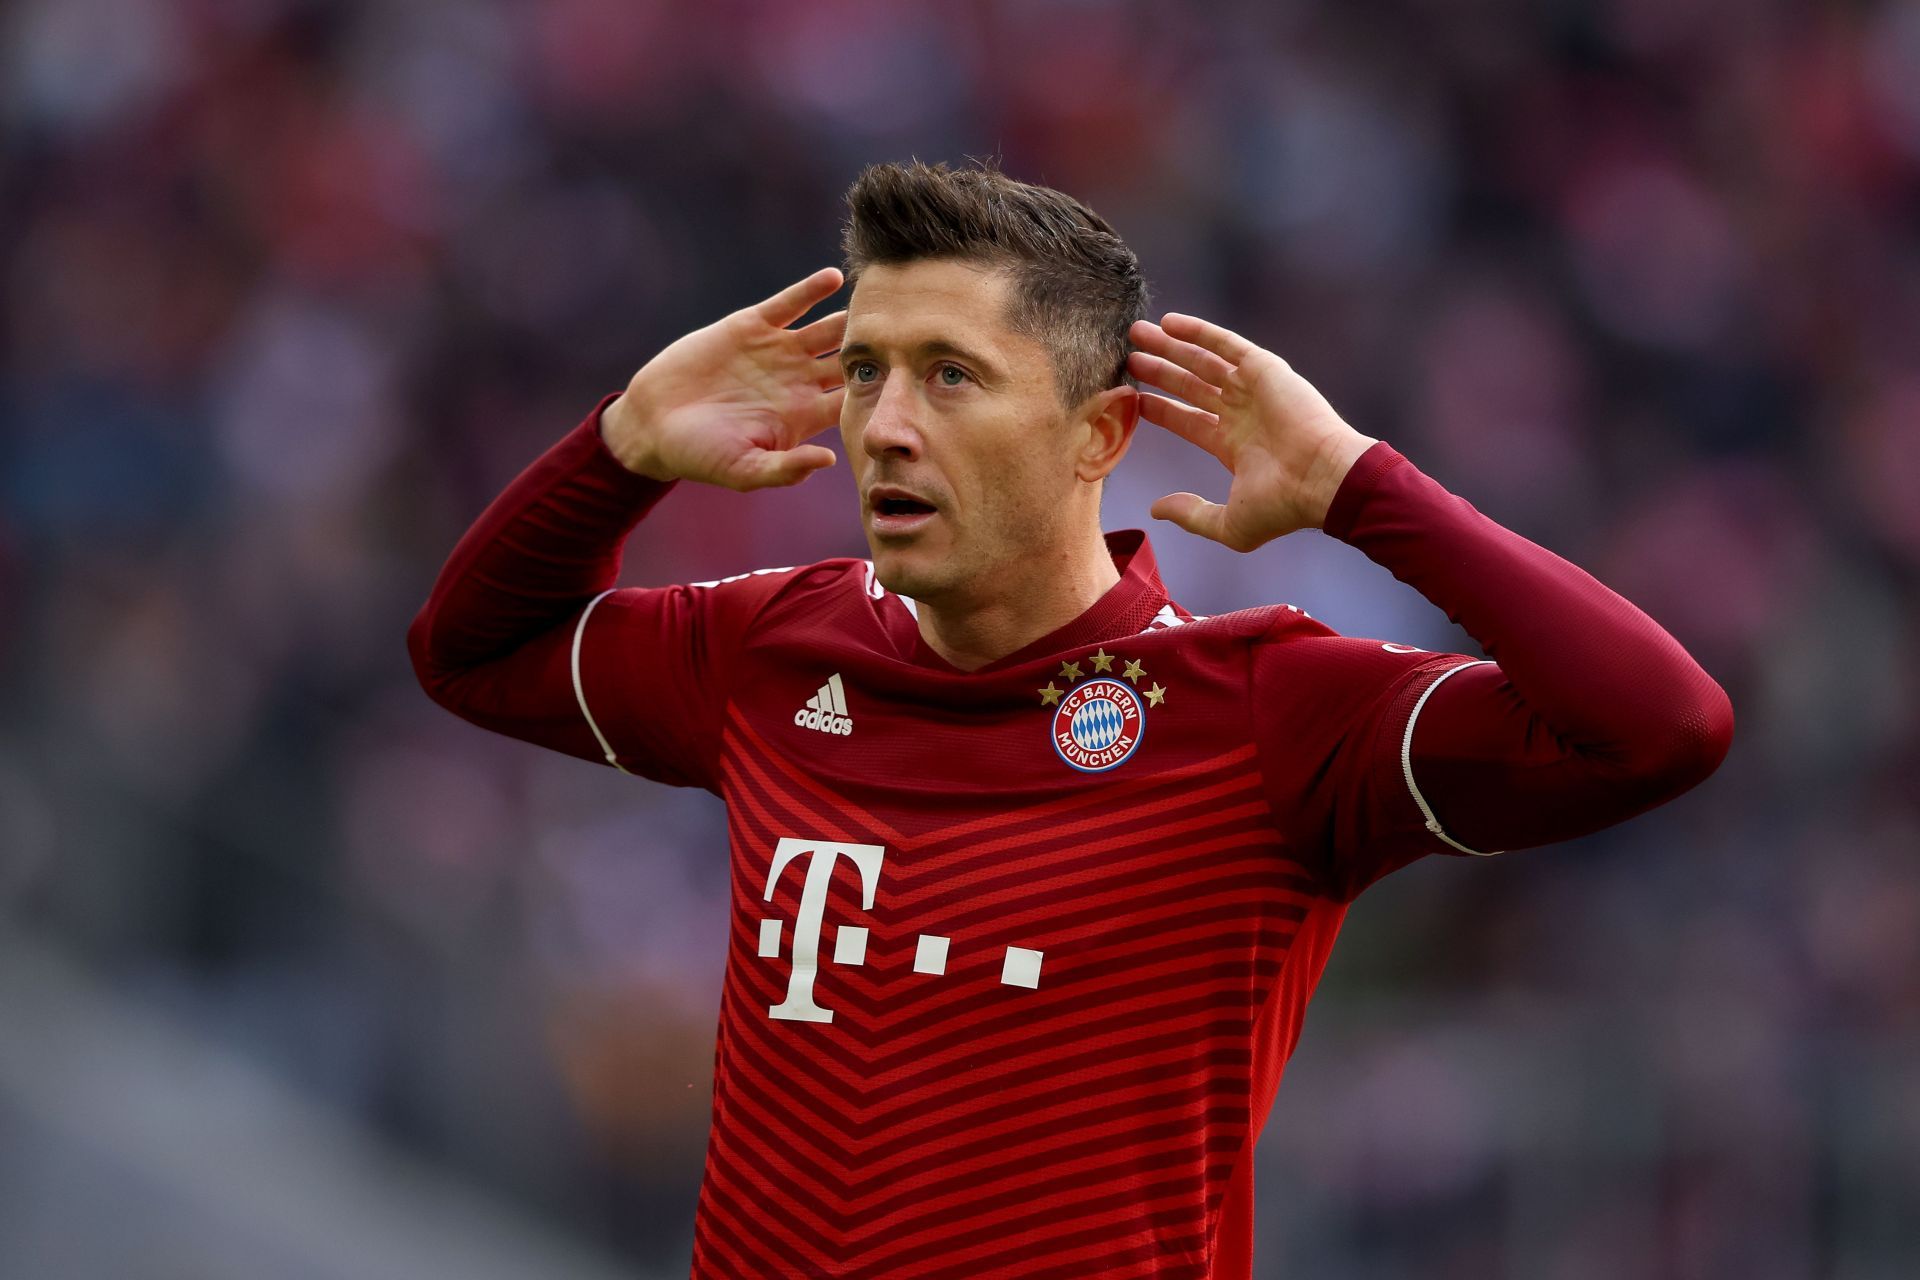 Lewandowski is one of the best strikers in the world